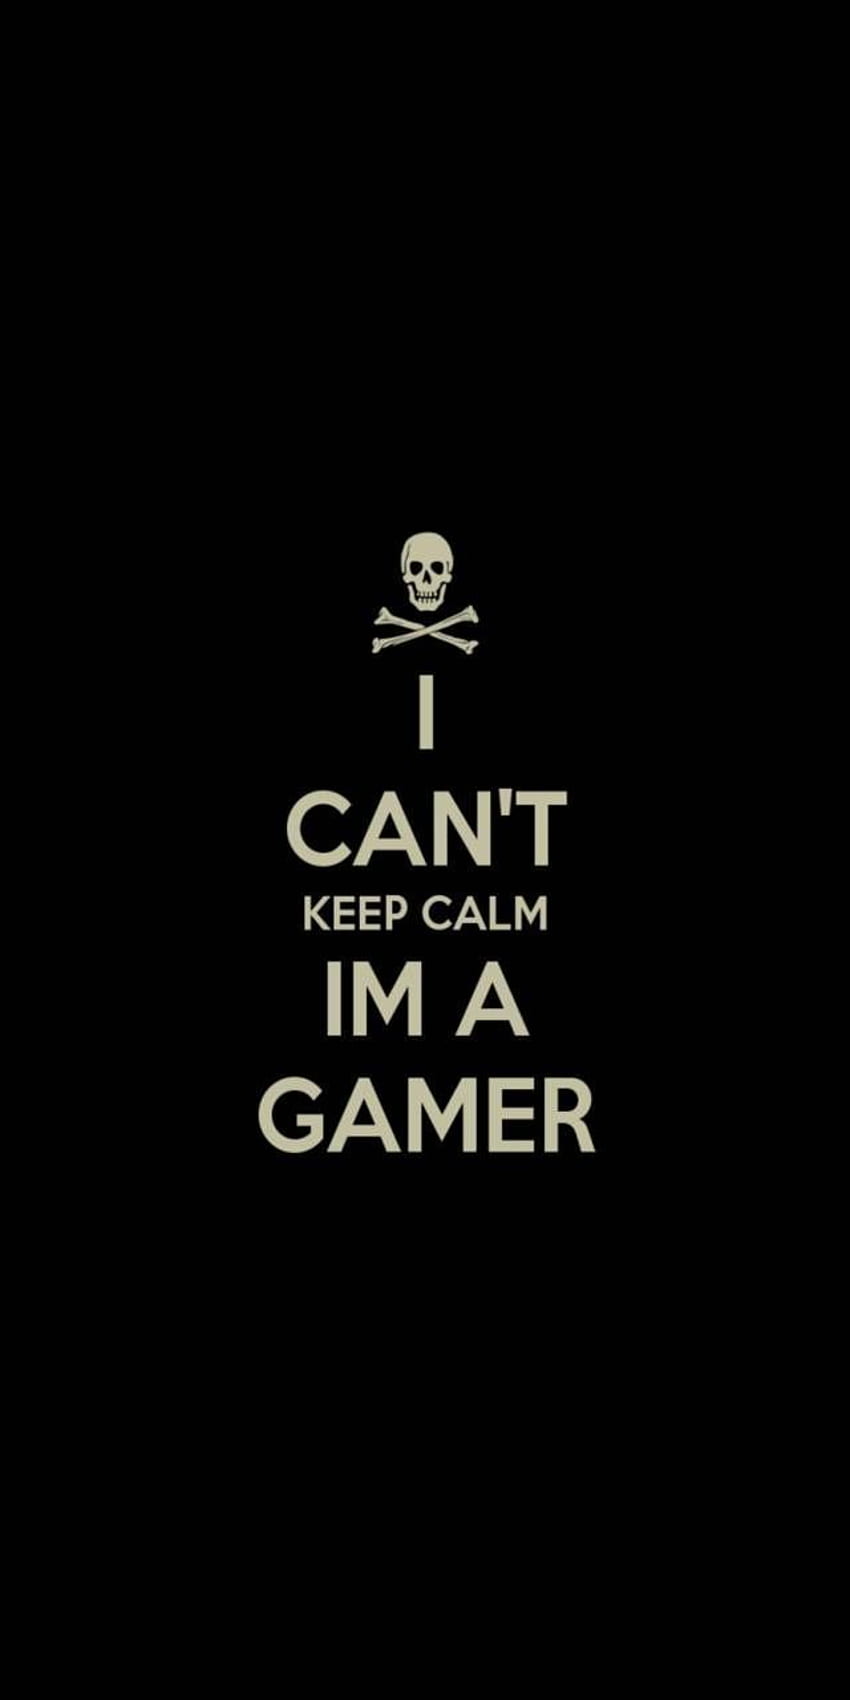 Gaming PinWire: Keep calm gamer by Mohamed7nabil - 65 - . 4 mins ago - Browse mi. Gaming , Gamer quotes, Game iphone HD phone wallpaper